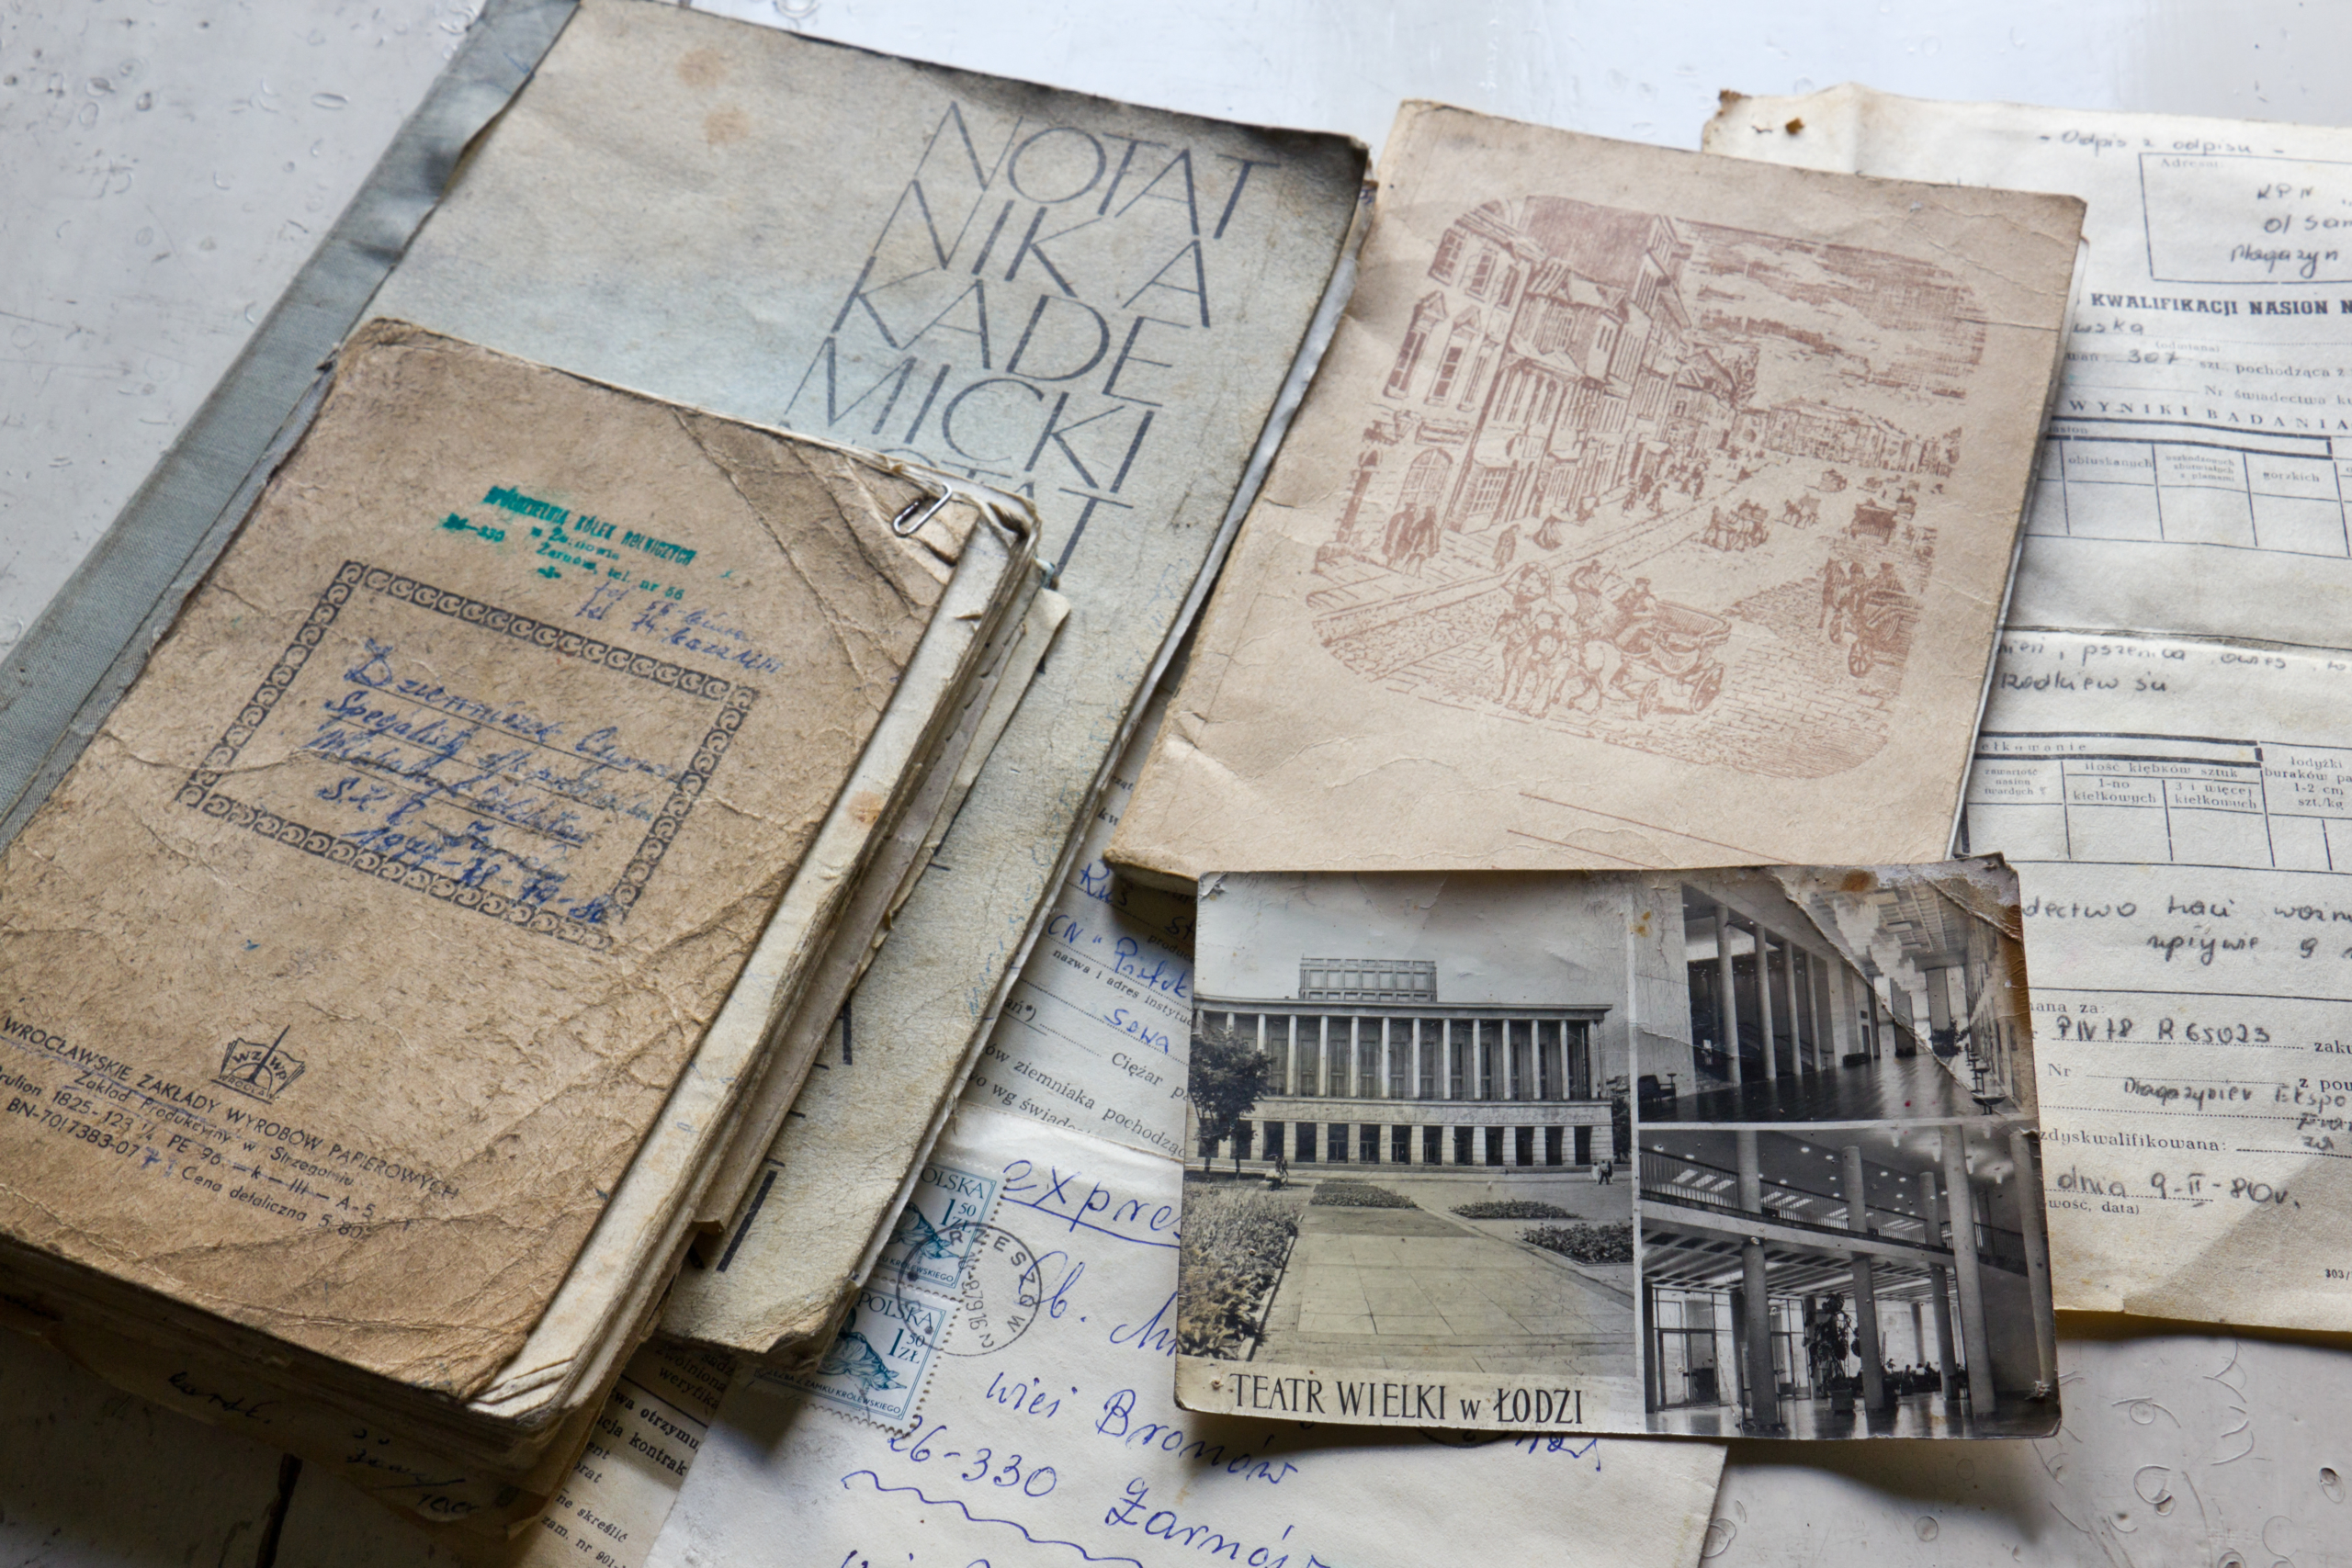 Photo shows an old documents, papers, notebooks and postcard.